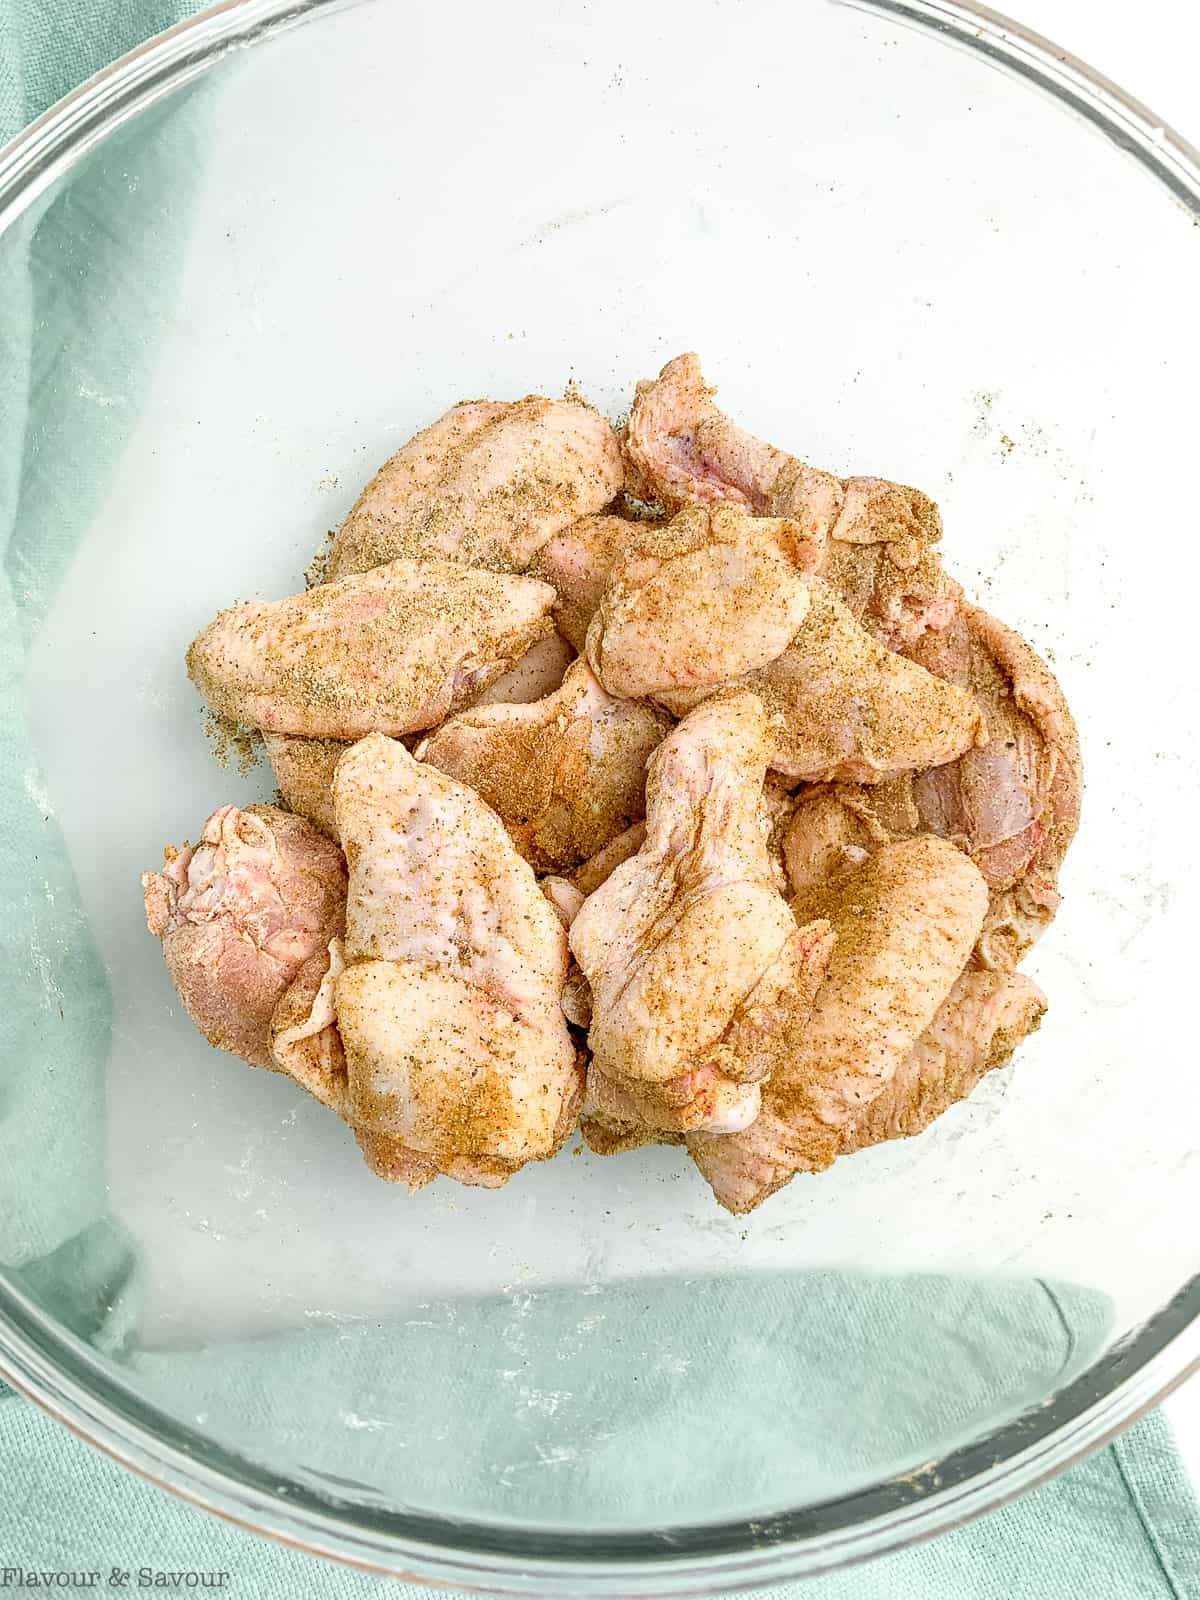 Raw chicken wings in a glass bowl with Old Bay seasoning.